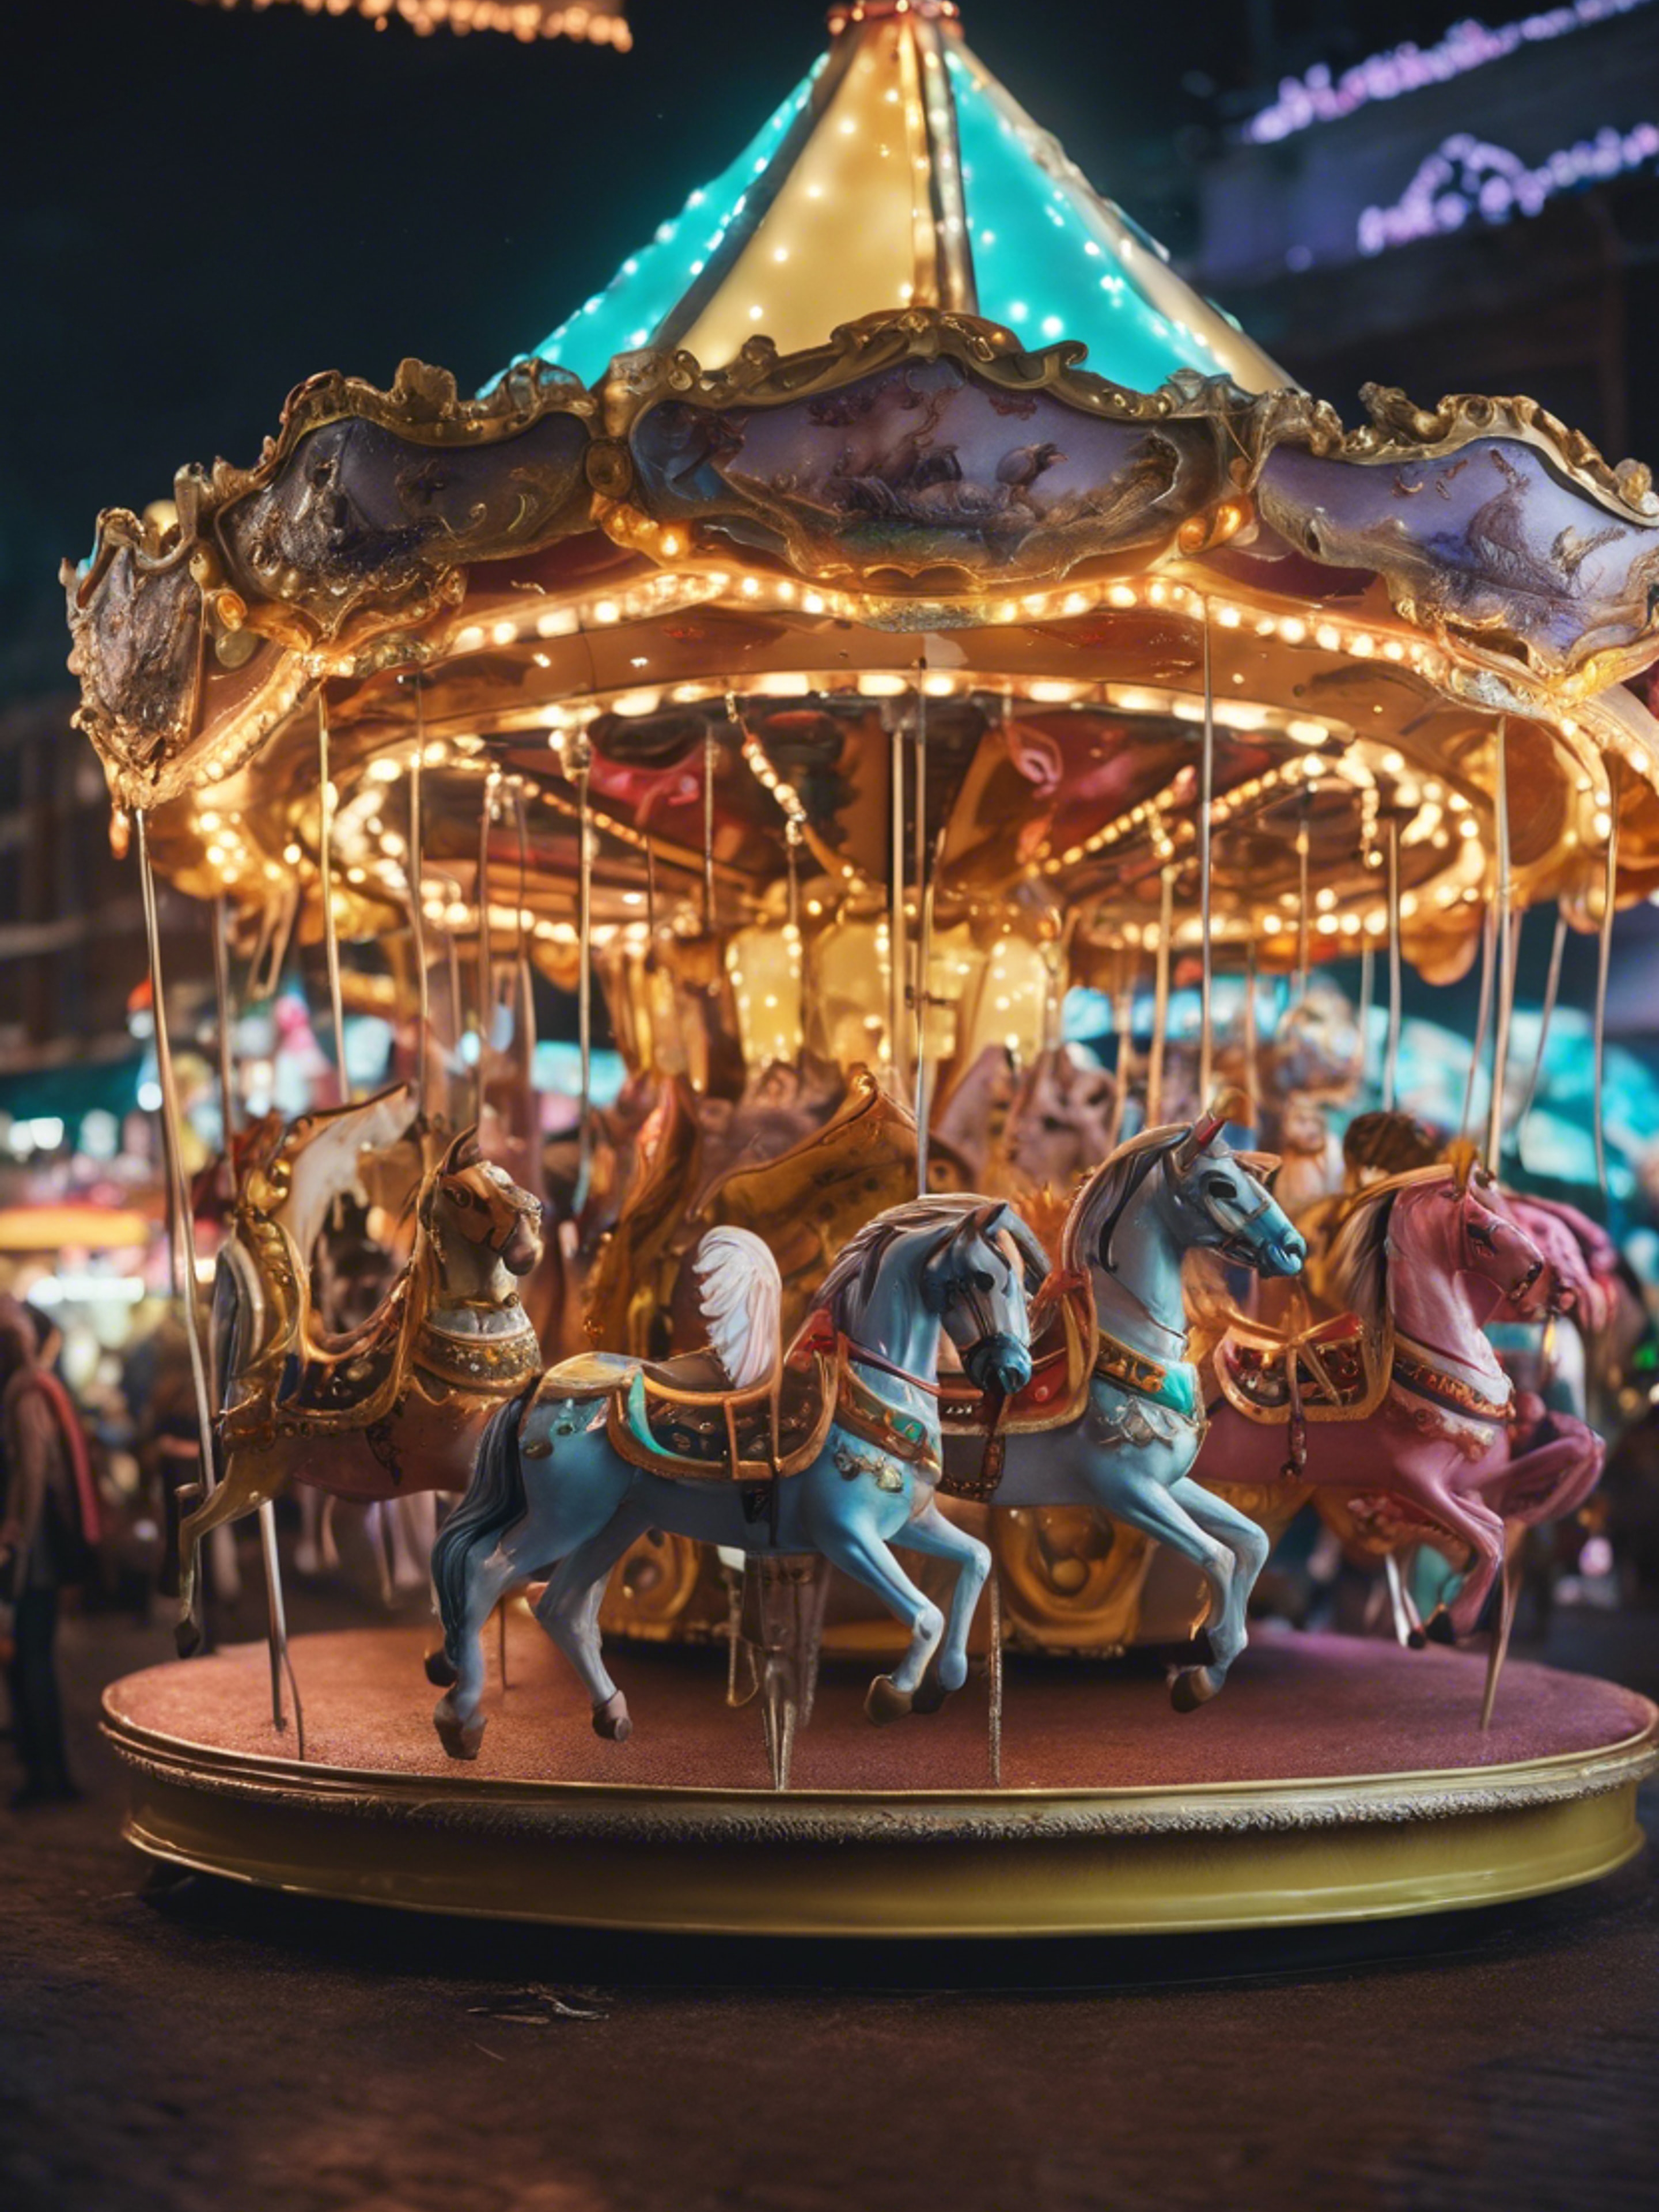 An enchanted carousel with various magical creatures as the seats, nestled in a festive carnival beneath a shower of neon stardust.壁紙[c01a4d9e6e424363abf7]